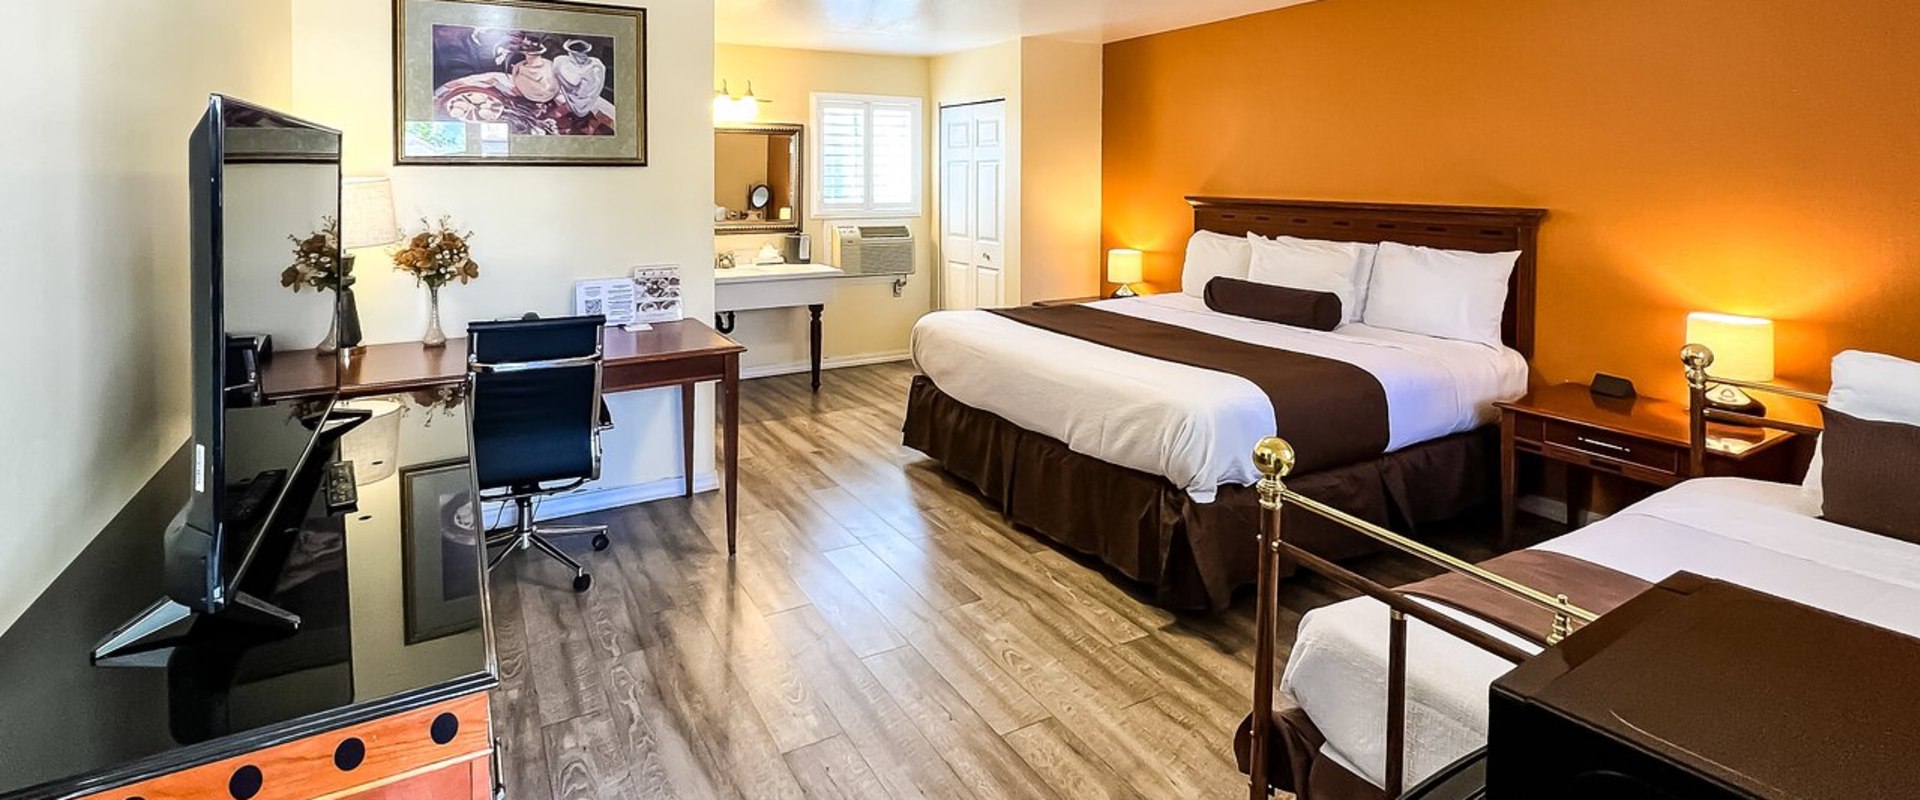 What is the Average Cost of Rooms at Inn & Suites in Northern California?